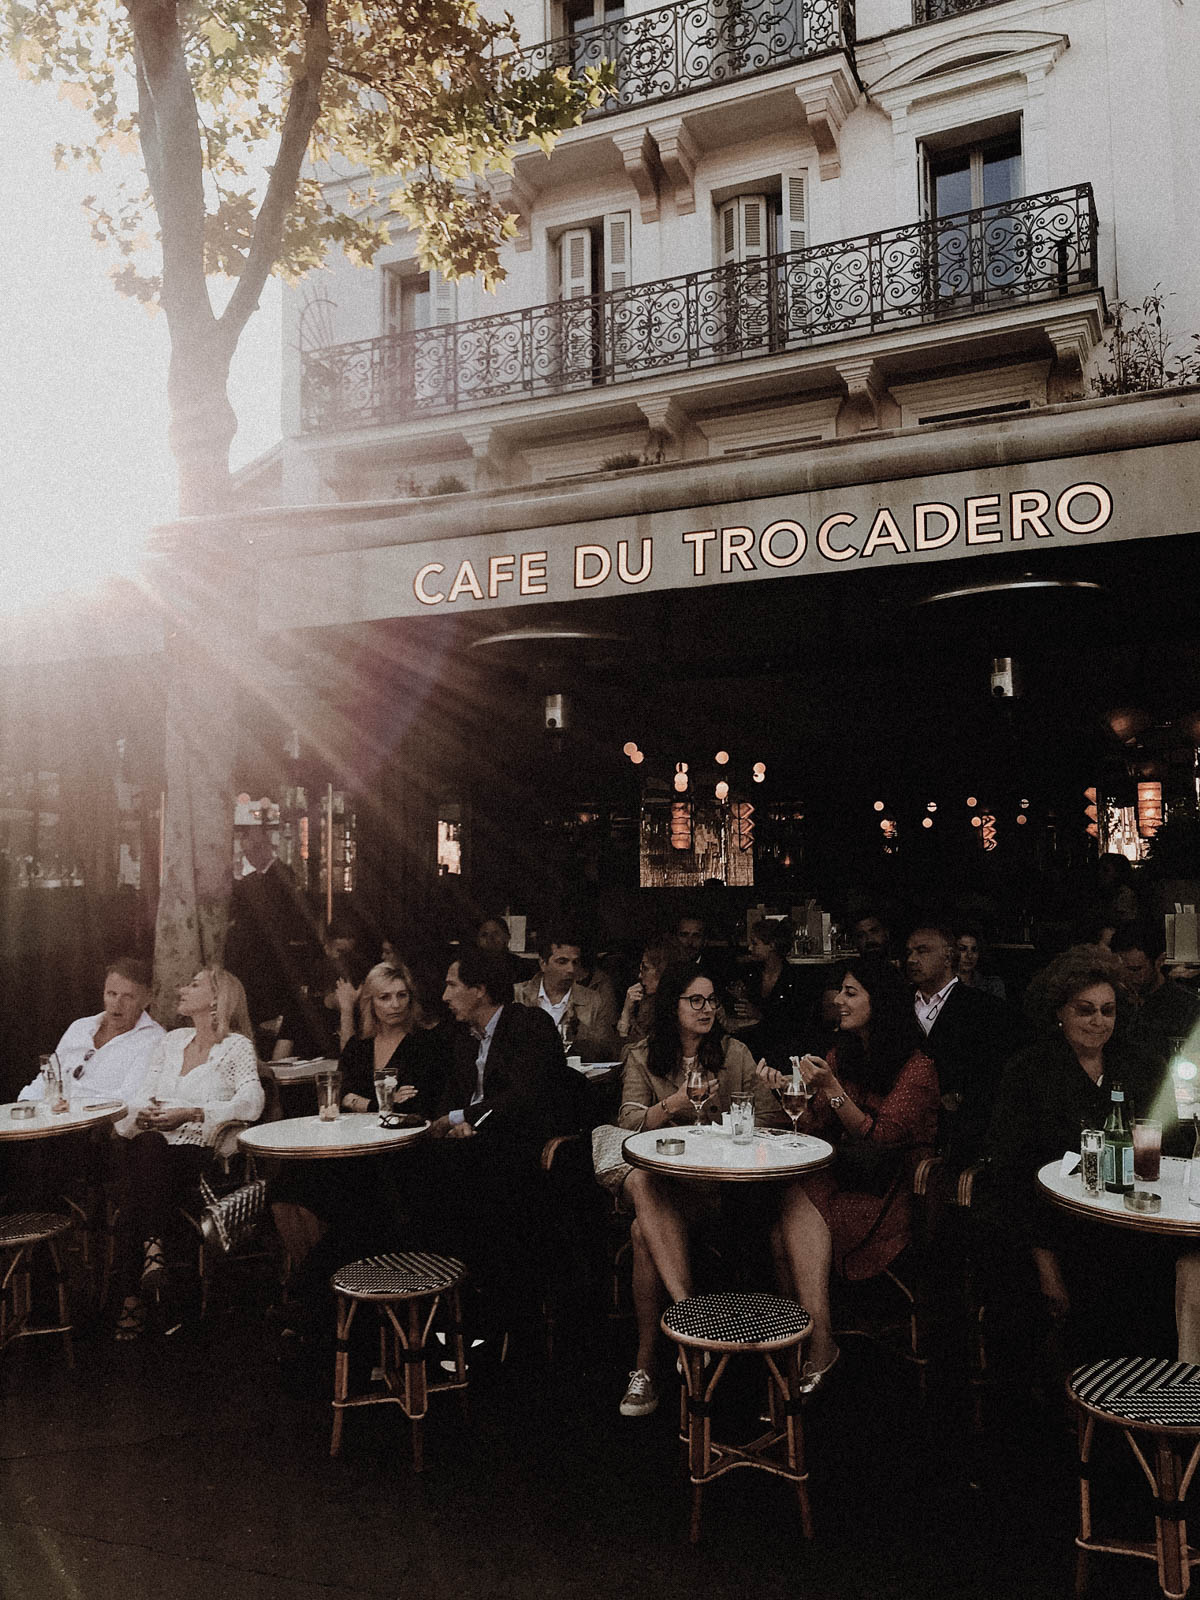 Paris France Travel Guide - Classic French Cafe Du Trocadero / RG Daily Blog